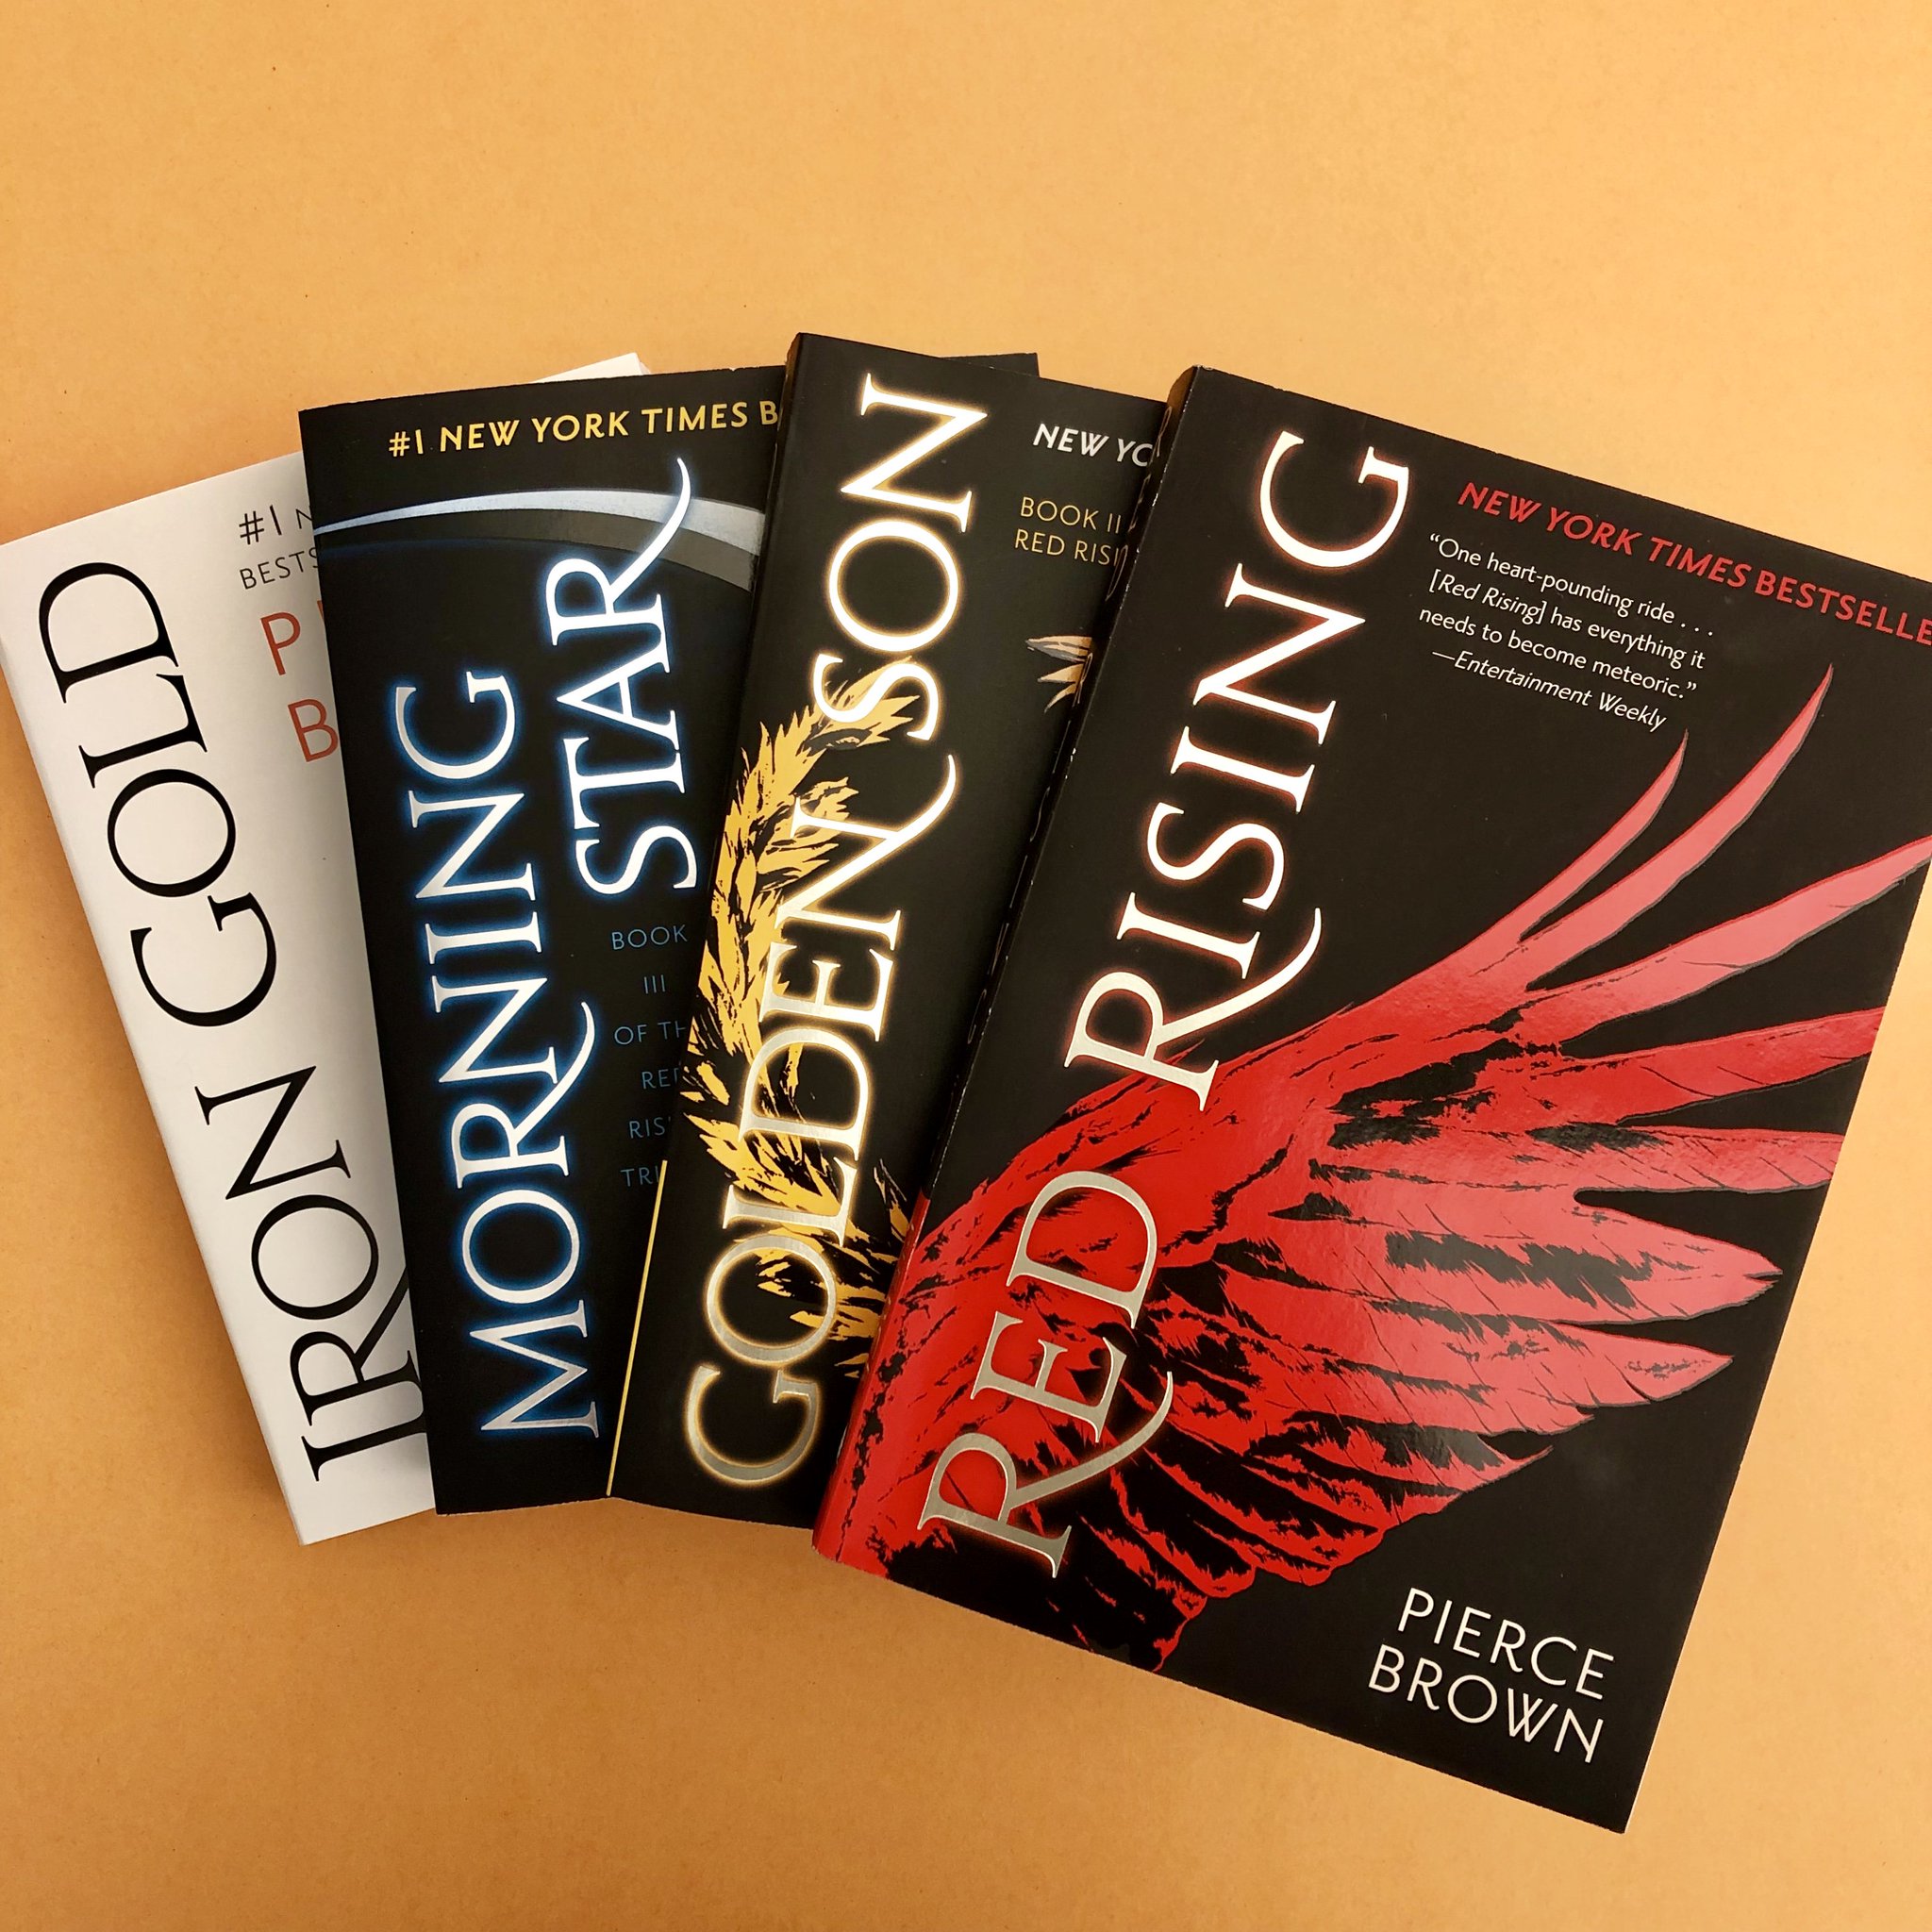 Del Rey Books On Twitter We Are Also Wishing A Happy Book Birthday To Red Rising Published Five Years Ago Today Congratulations Pierce Brown Https T Co 8lh4nmvthd